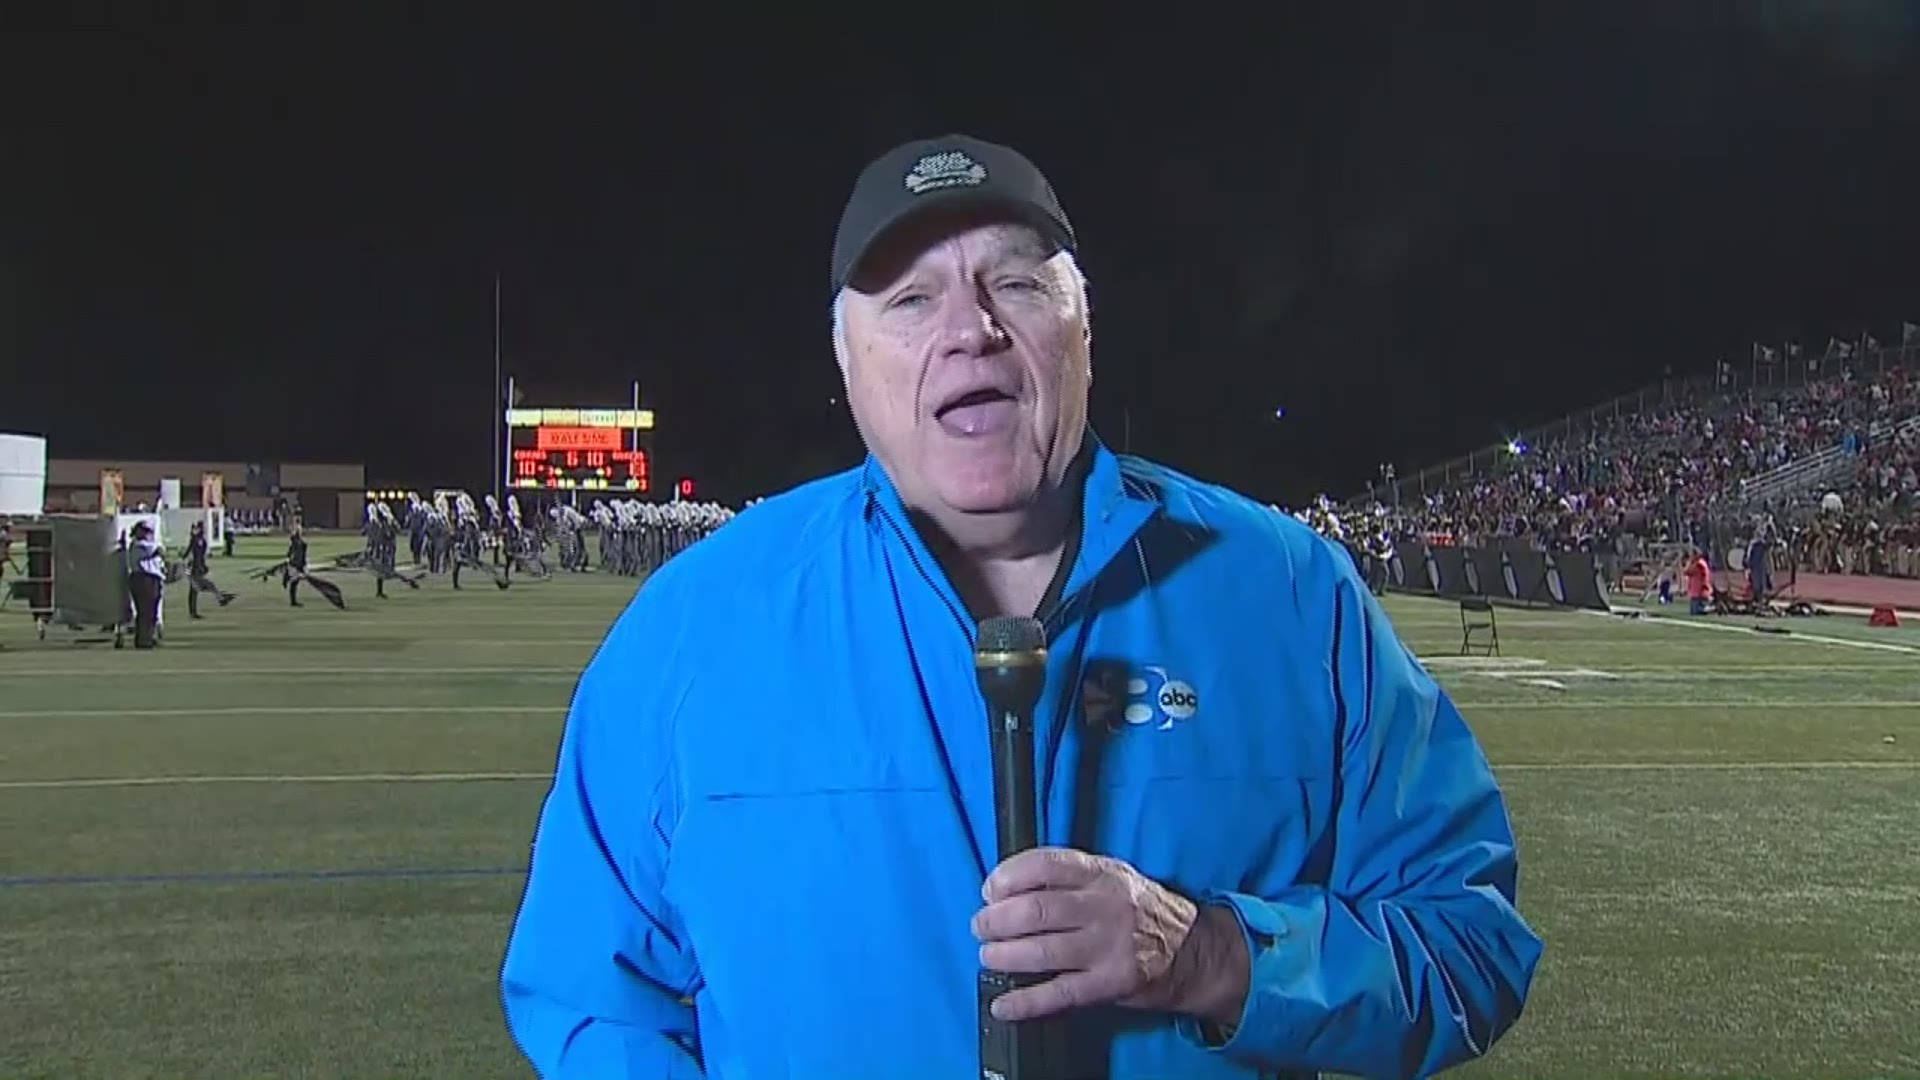 It's week seven of the high school football season and Dale Hansen is at our game of the week, The Colony vs. Frisco Lone Star.